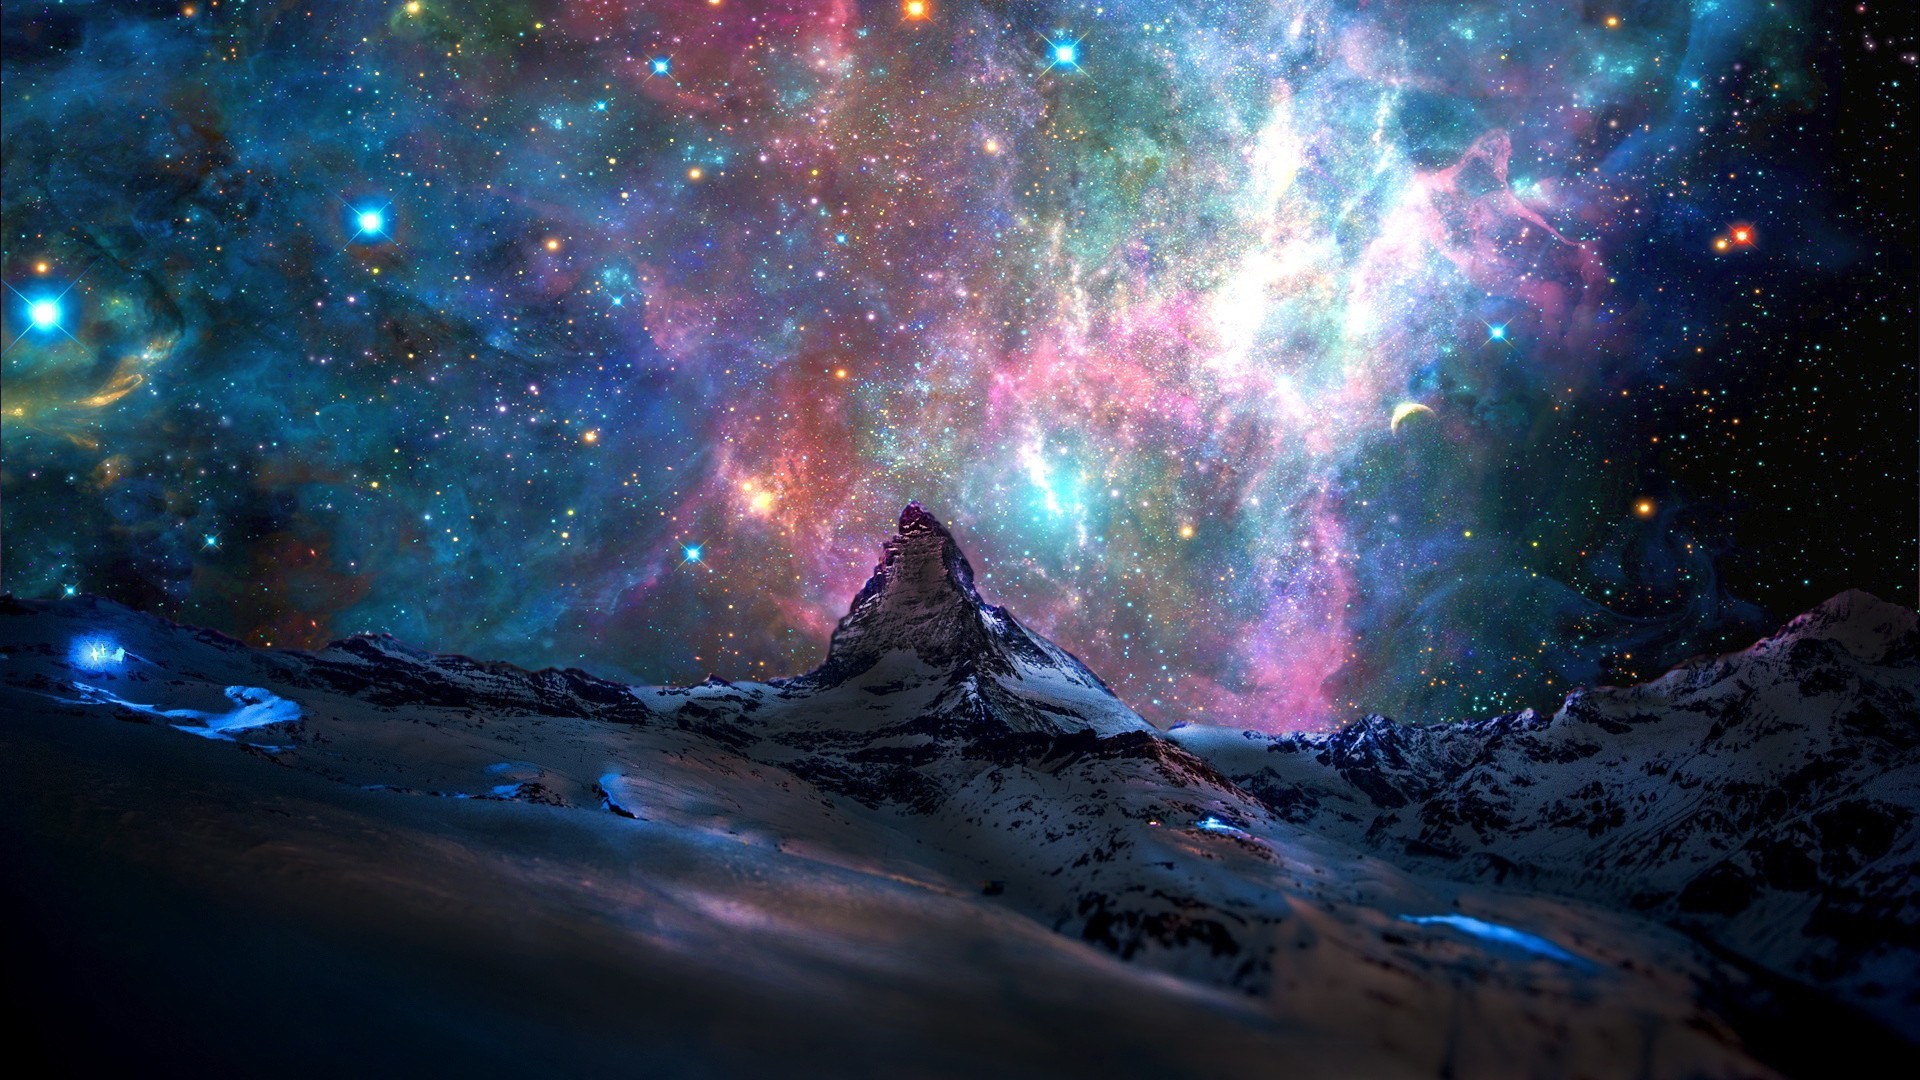 1920x1080 Space Galaxy View From Switzerland Mountains Wallpaper Check more at  http://hdwallpaperfx.